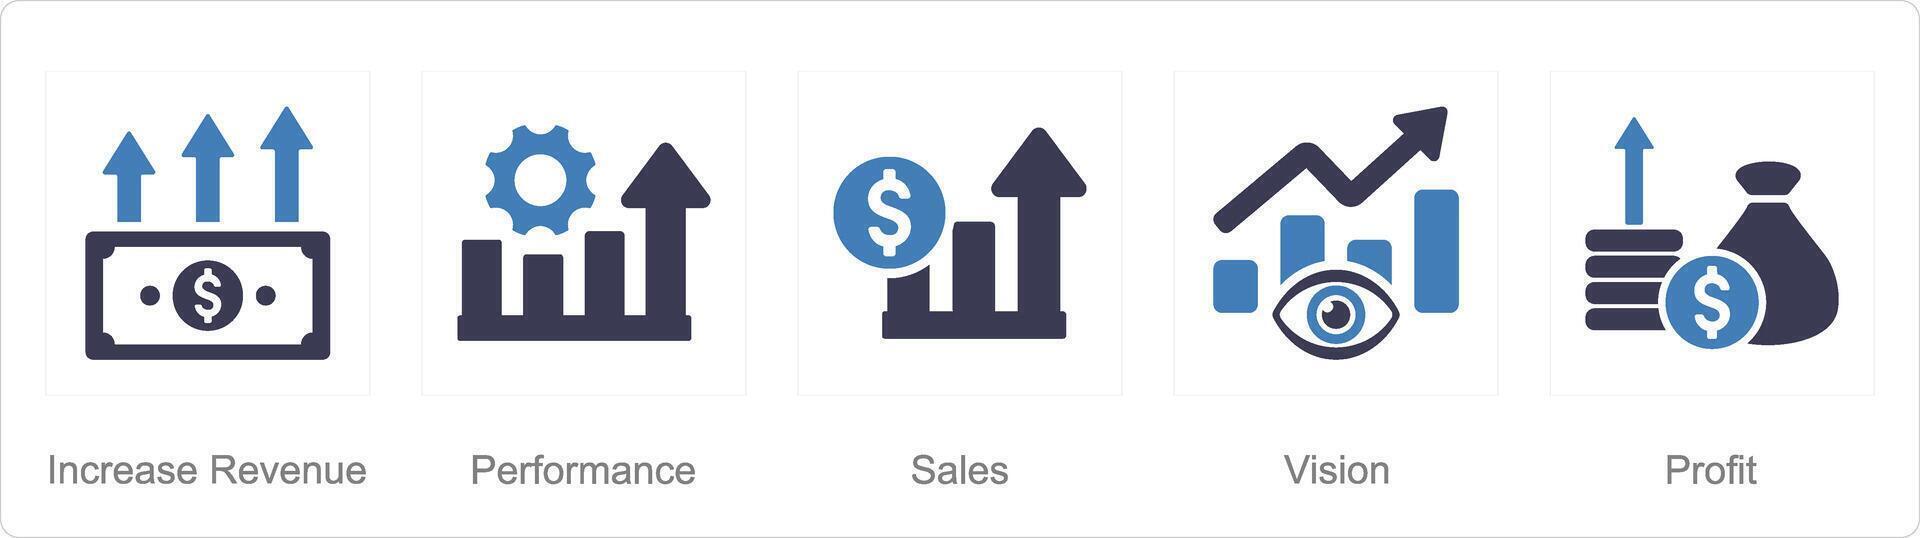 A set of 5 Increase Sale icons as increase sale, performance, sales vector